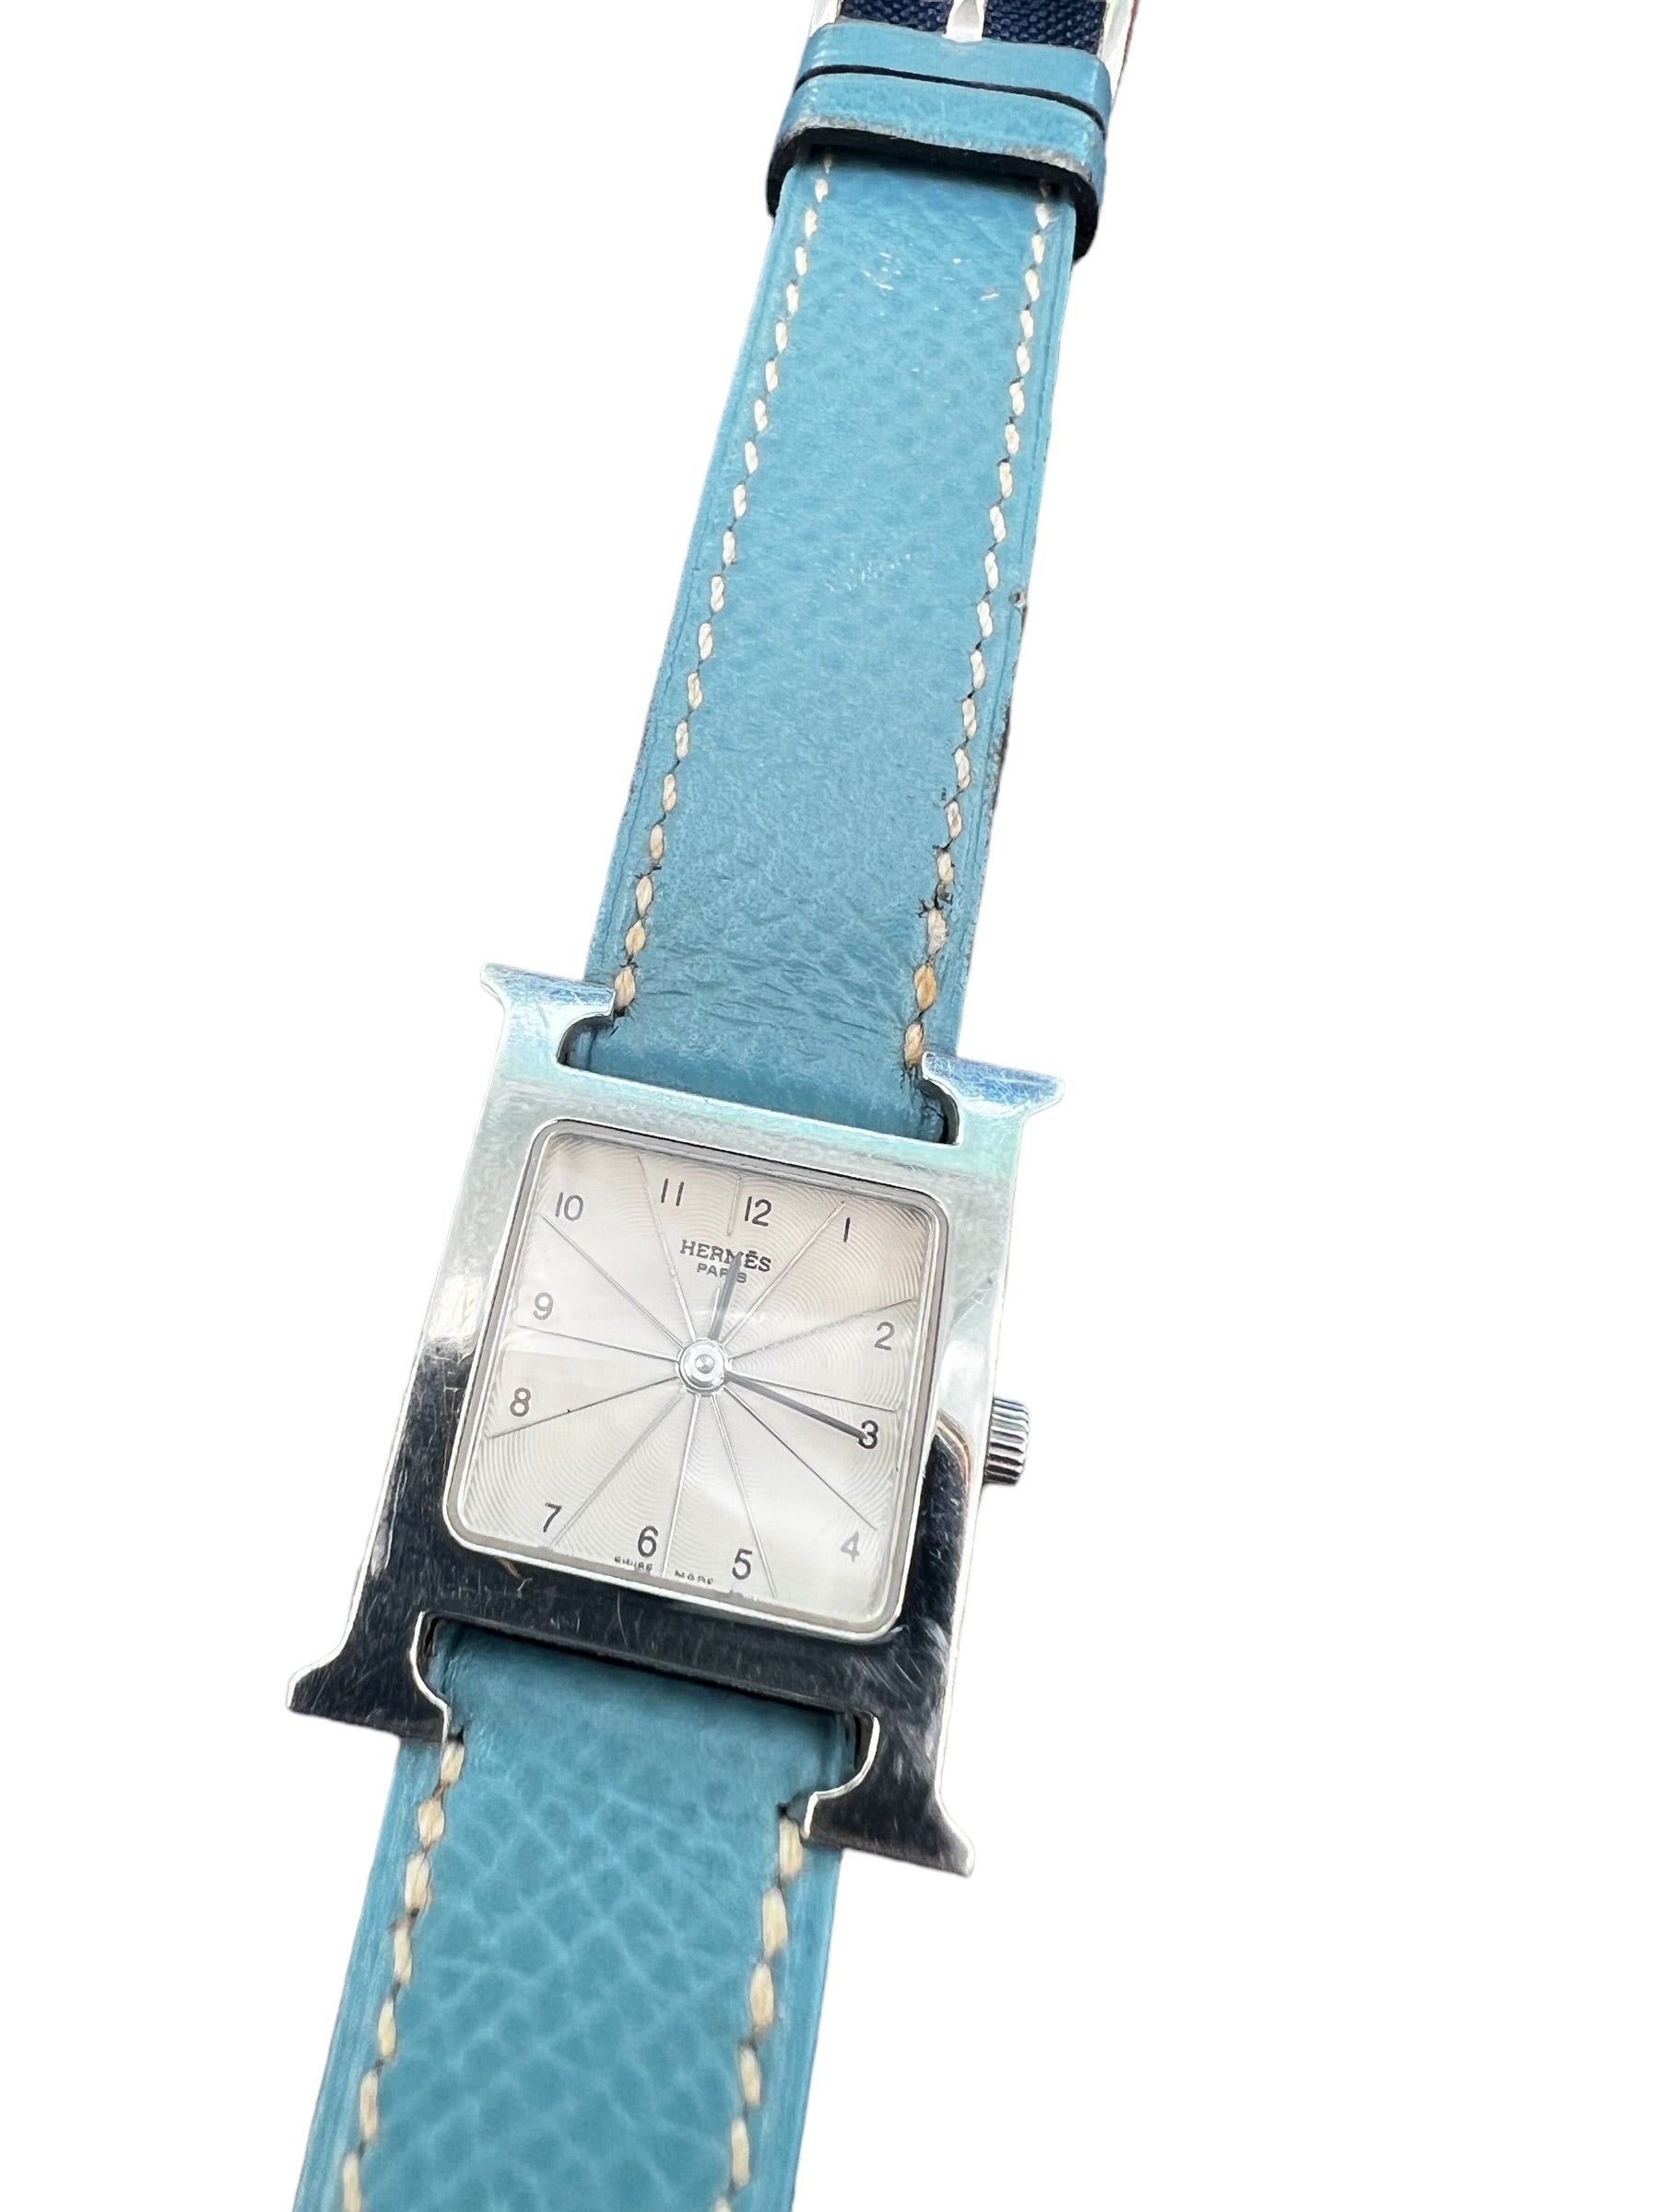 hermes huere H vintage watch in blue leather sapphire rare find stunning timeless watch